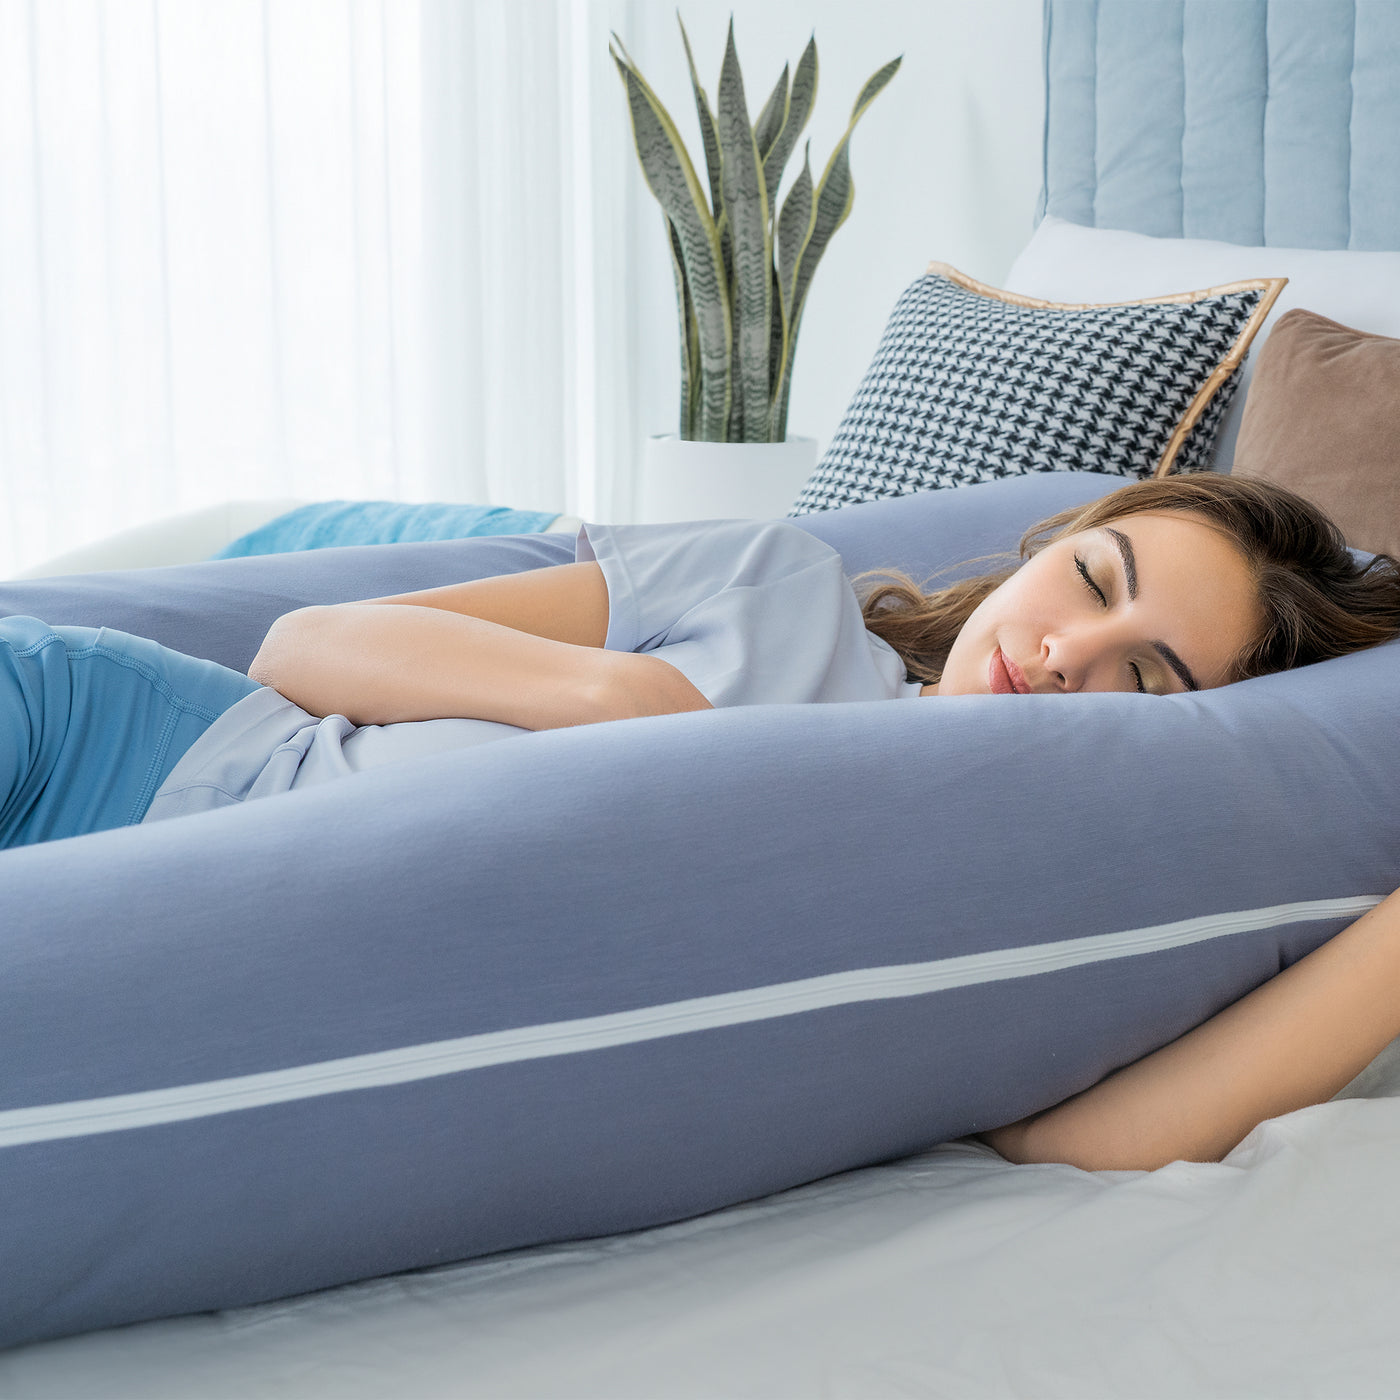 55" Clasical U-shaped Pregnancy Pillow (Cooling Silky Blue)